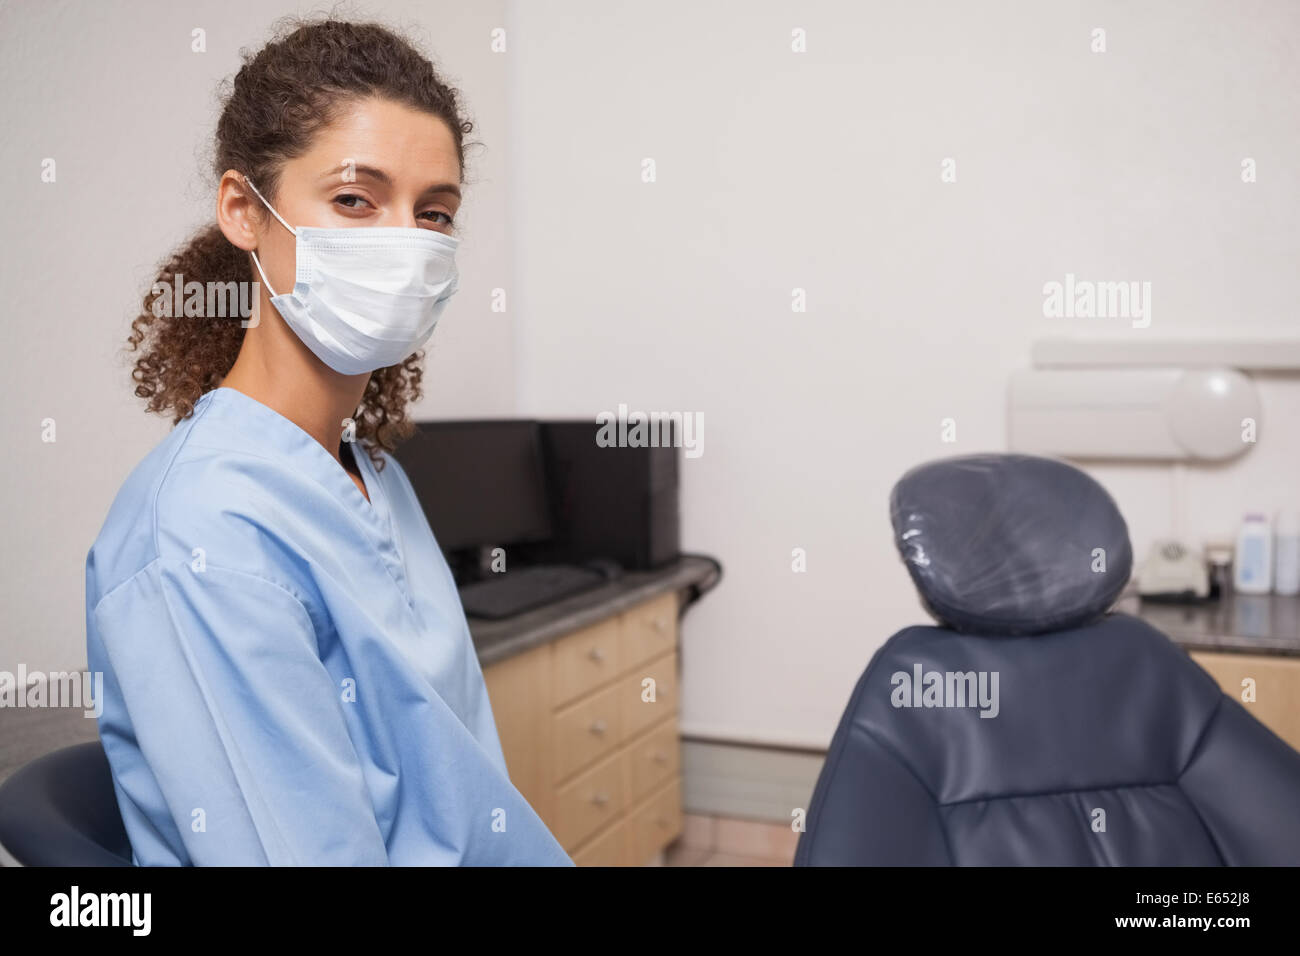 Dentiste en masque chirurgical looking at camera Banque D'Images